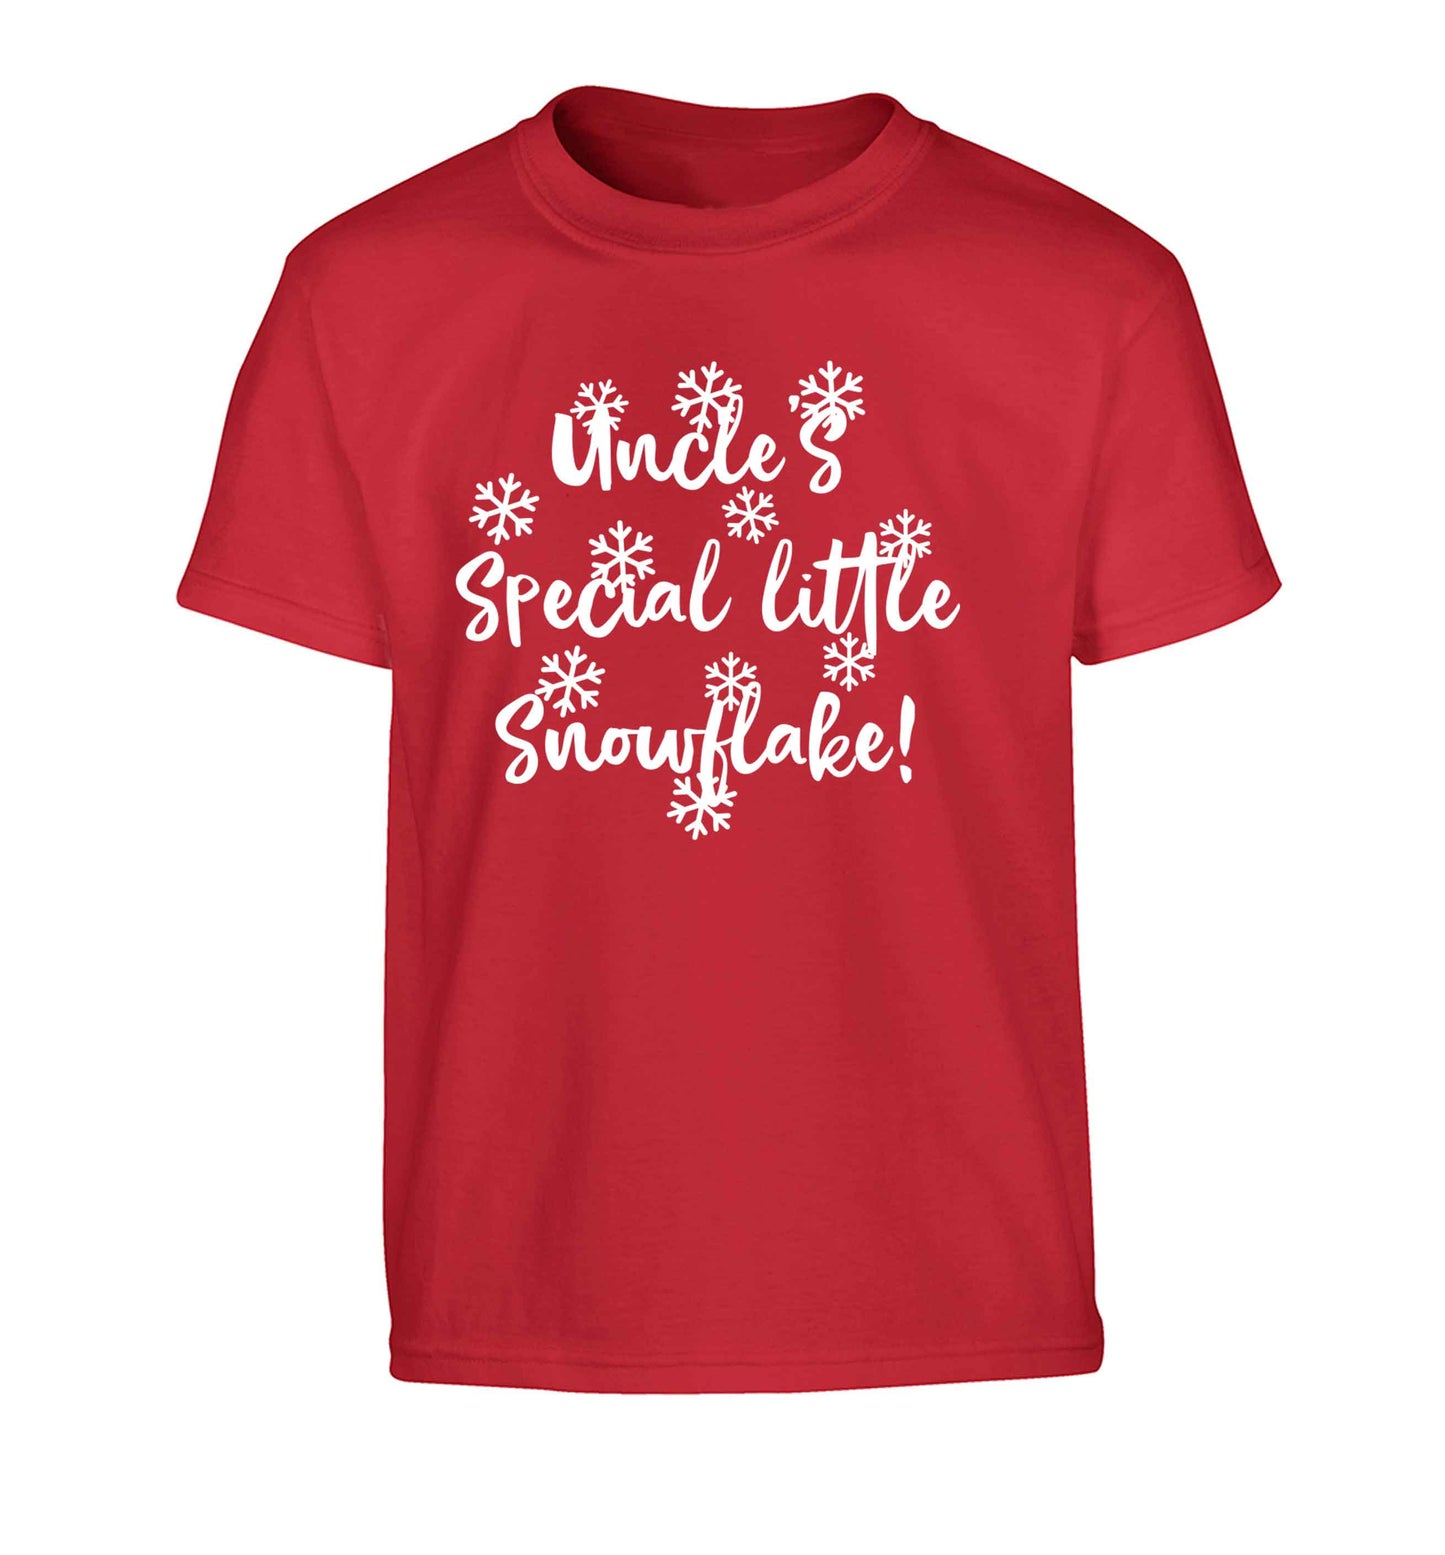 Uncle's special little snowflake Children's red Tshirt 12-13 Years